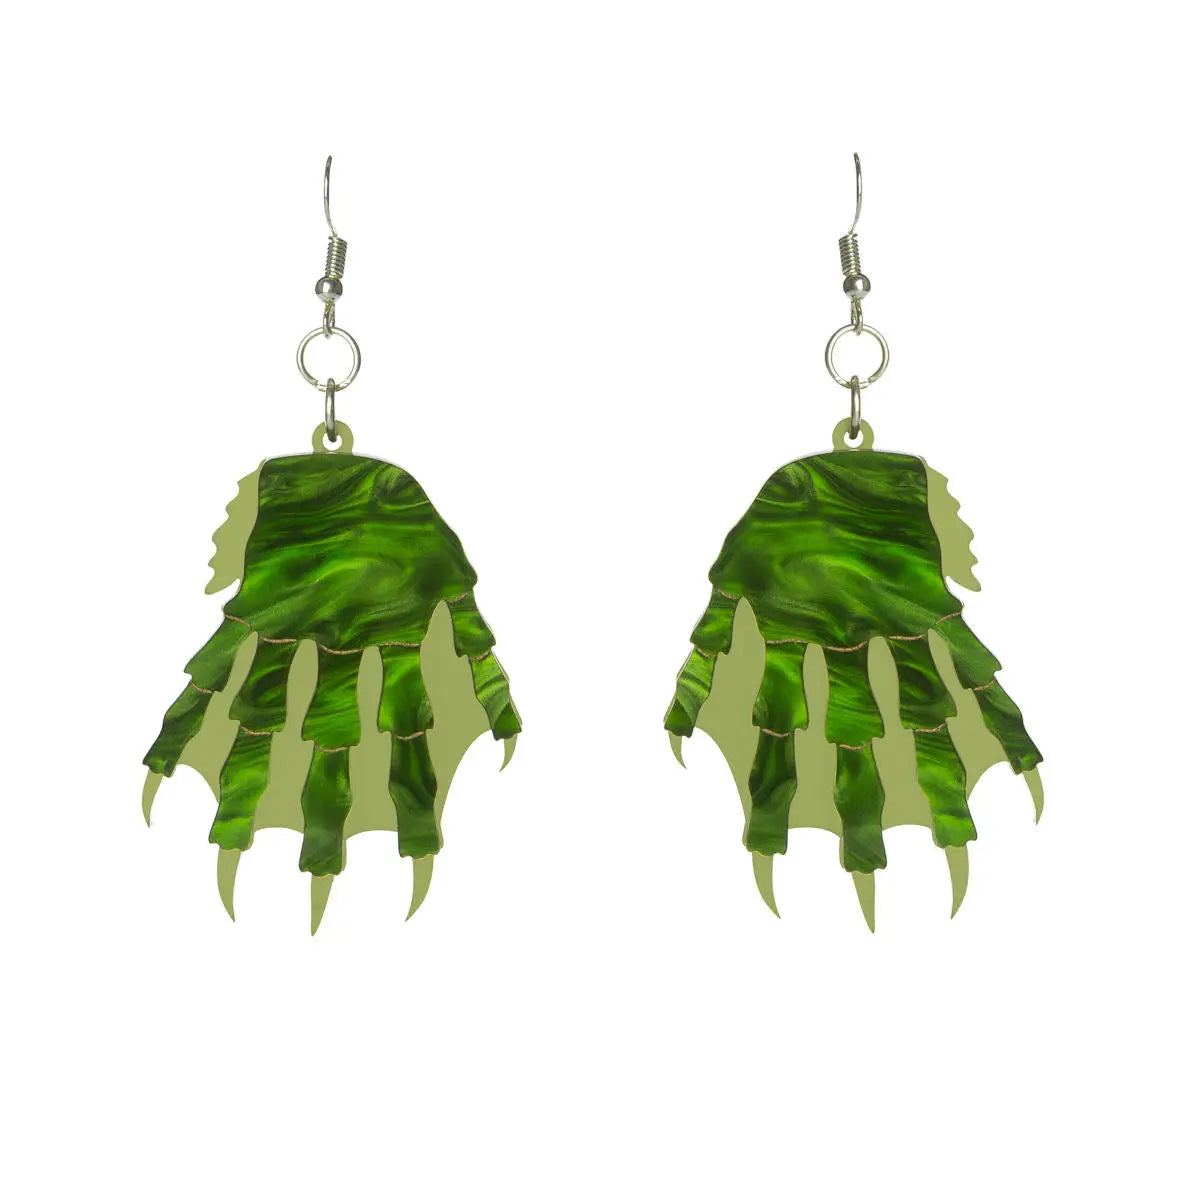 A pair of laser-cut hand layered acrylic dangle earrings In the shape of the Creature from the Black Lagoon’s claws. With marbled green with matte green webbed claws & engraved and hand painted gold detailing.